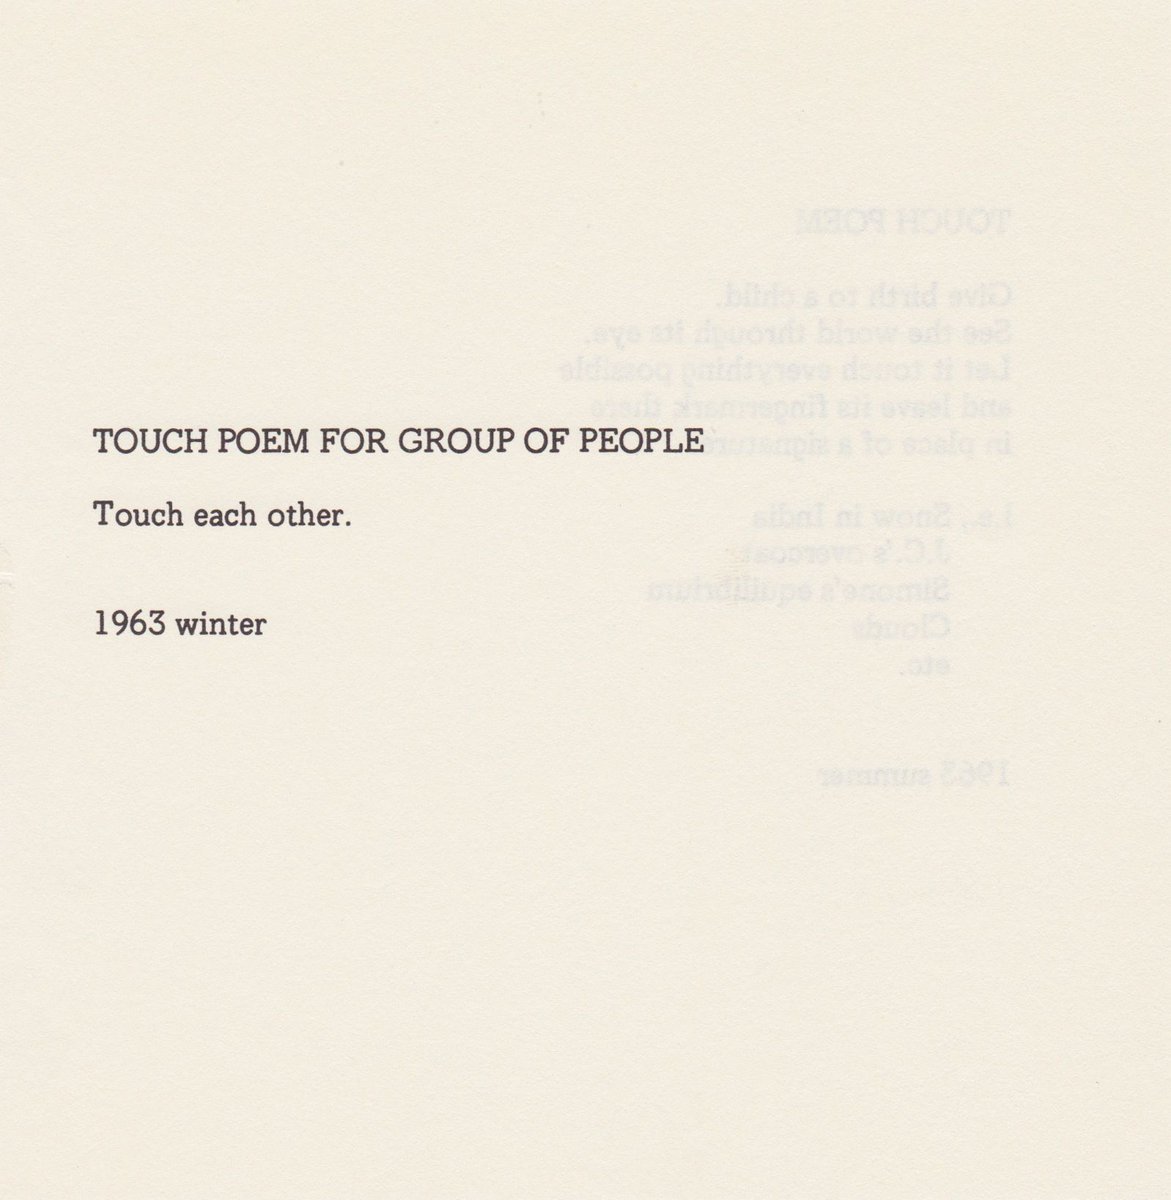 TOUCH POEM FOR GROUP OF PEOPLE
Touch each other.

1963 winter 